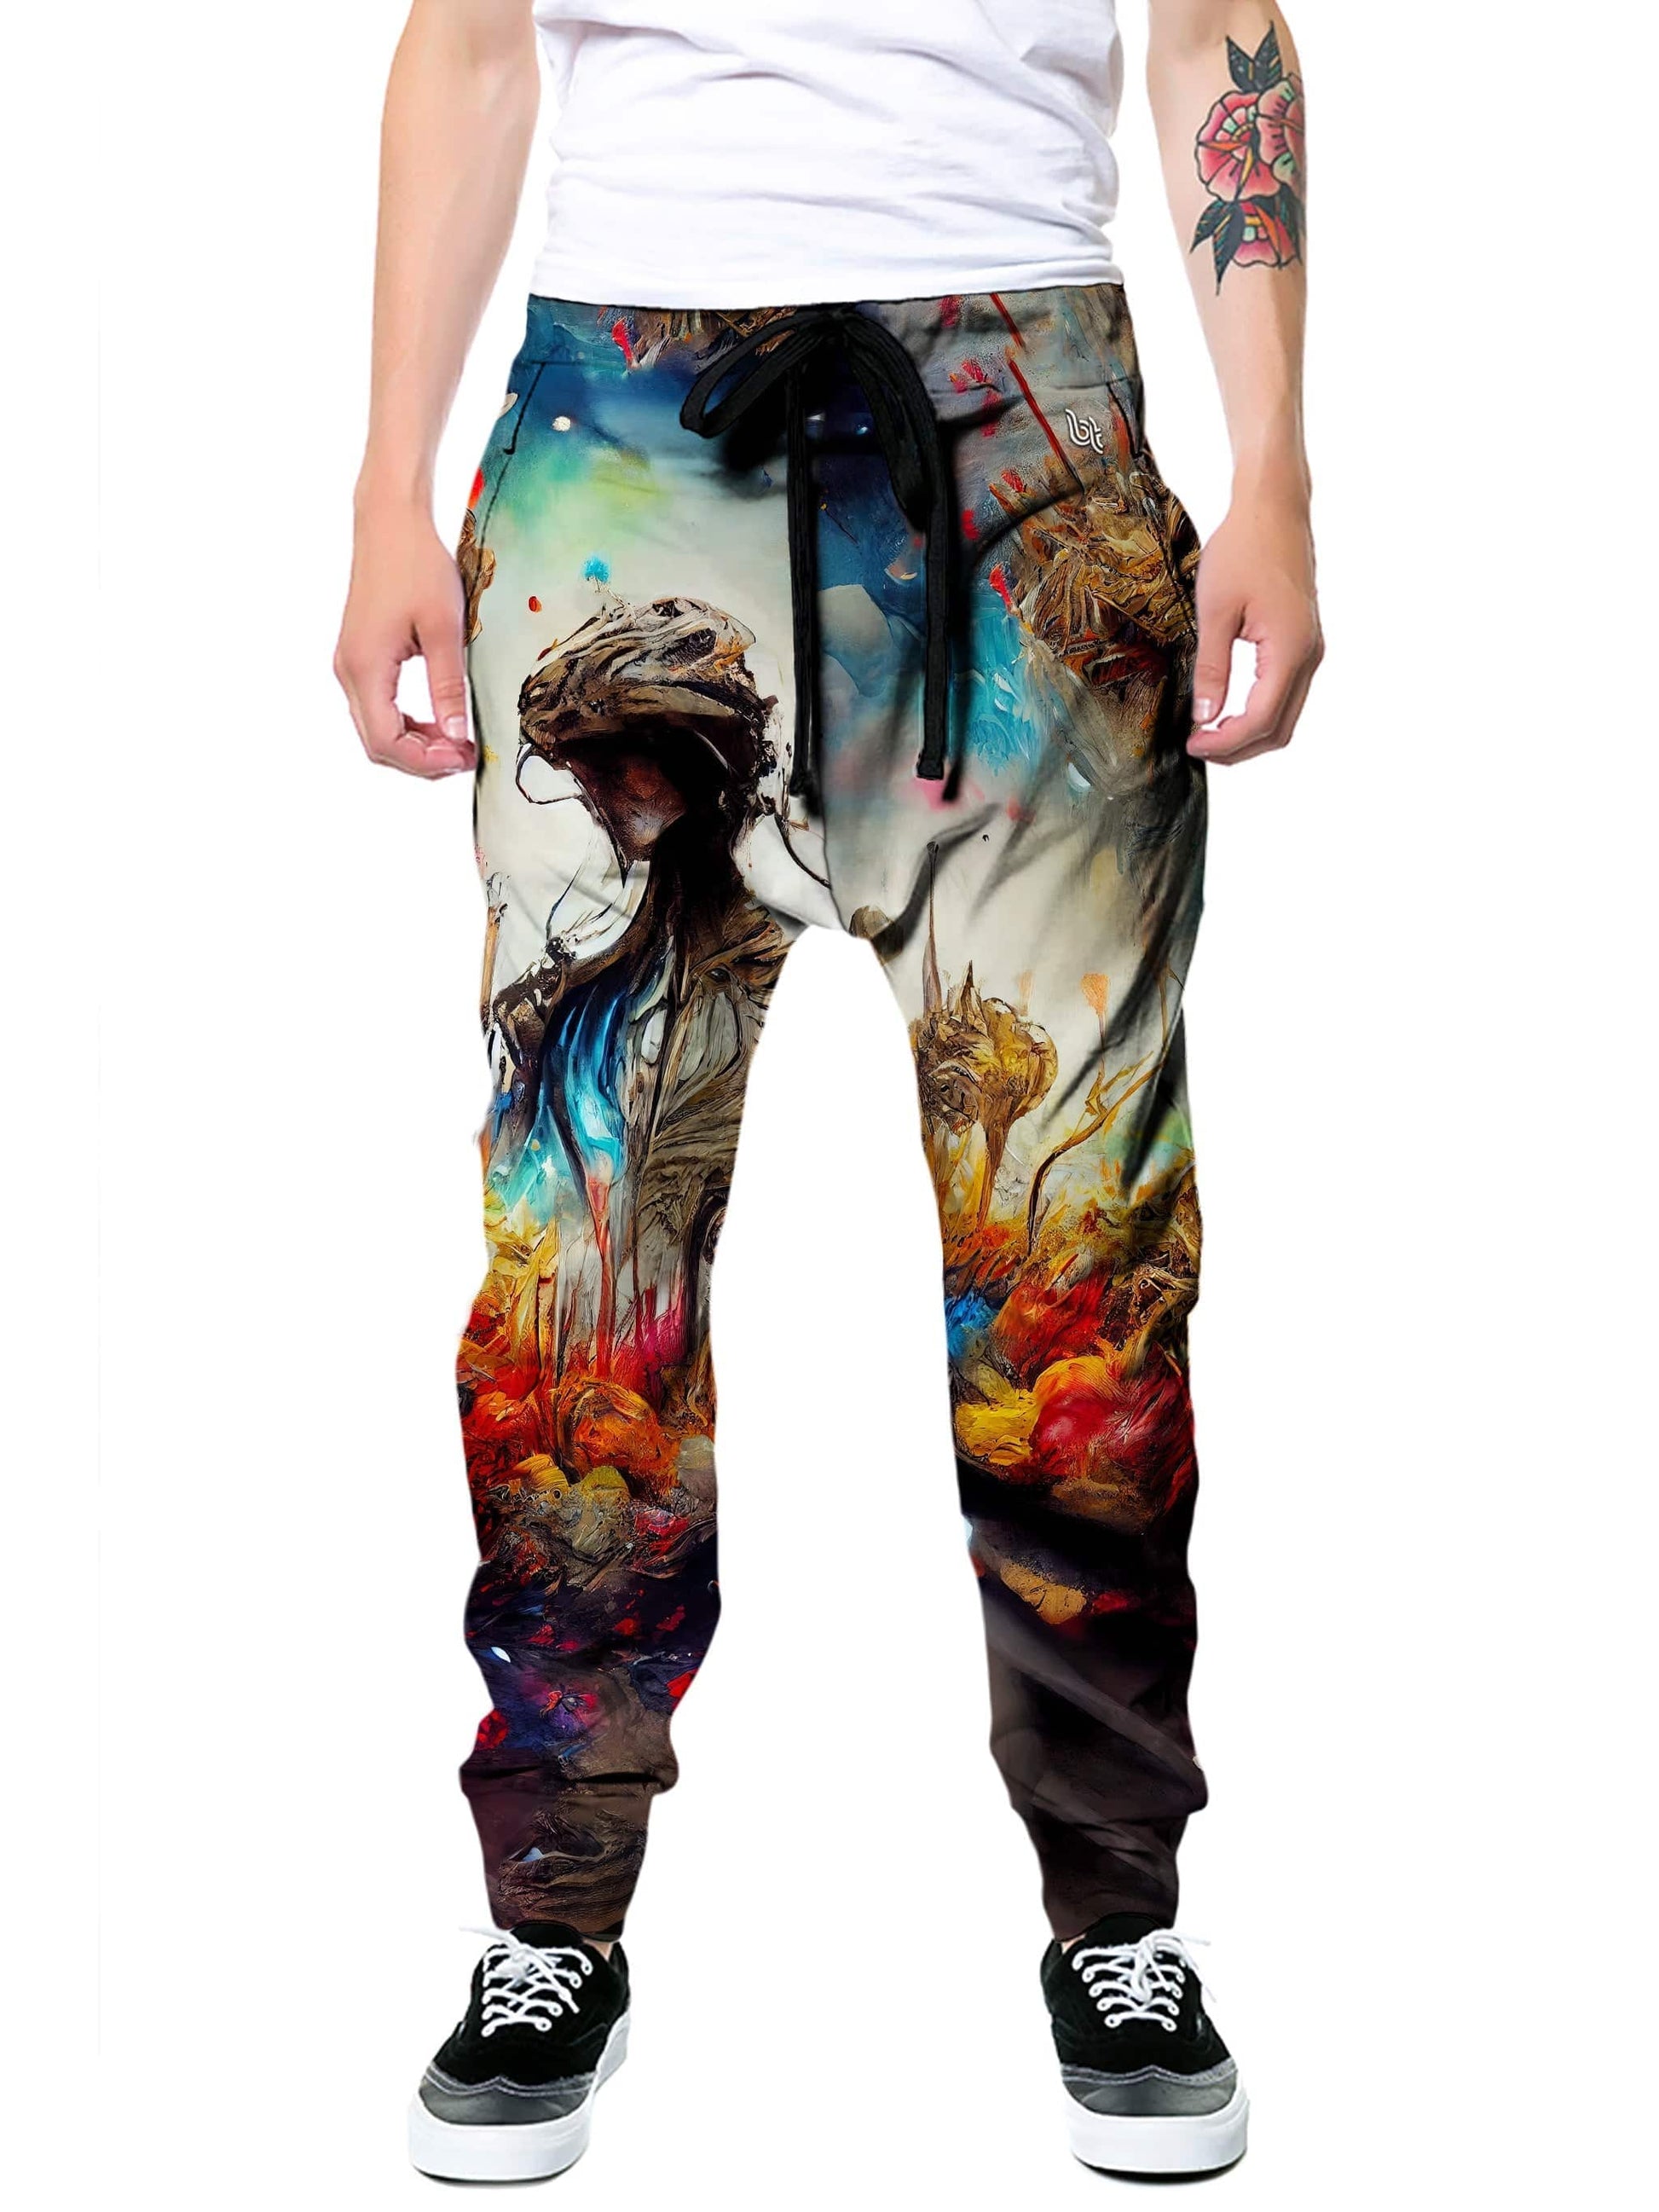 Fanatical Obligation Joggers, Gratefully Dyed, | iEDM